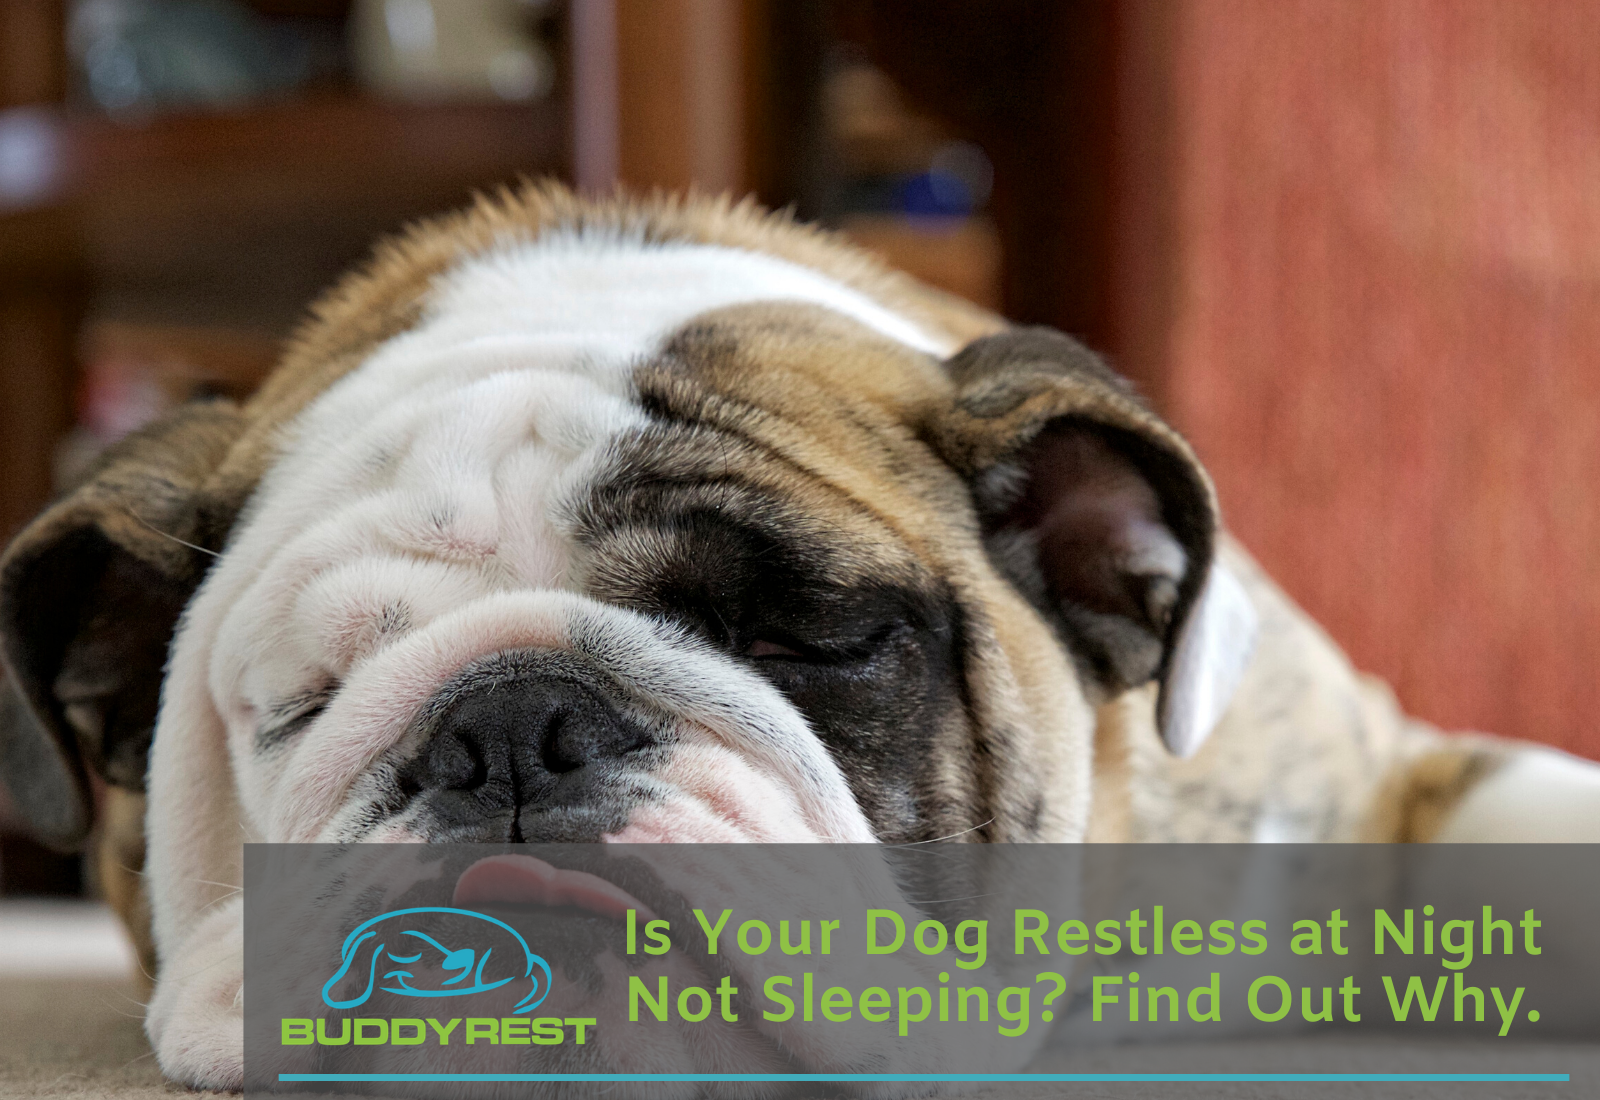 Is your dog restless at night not sleeping? Find out why!